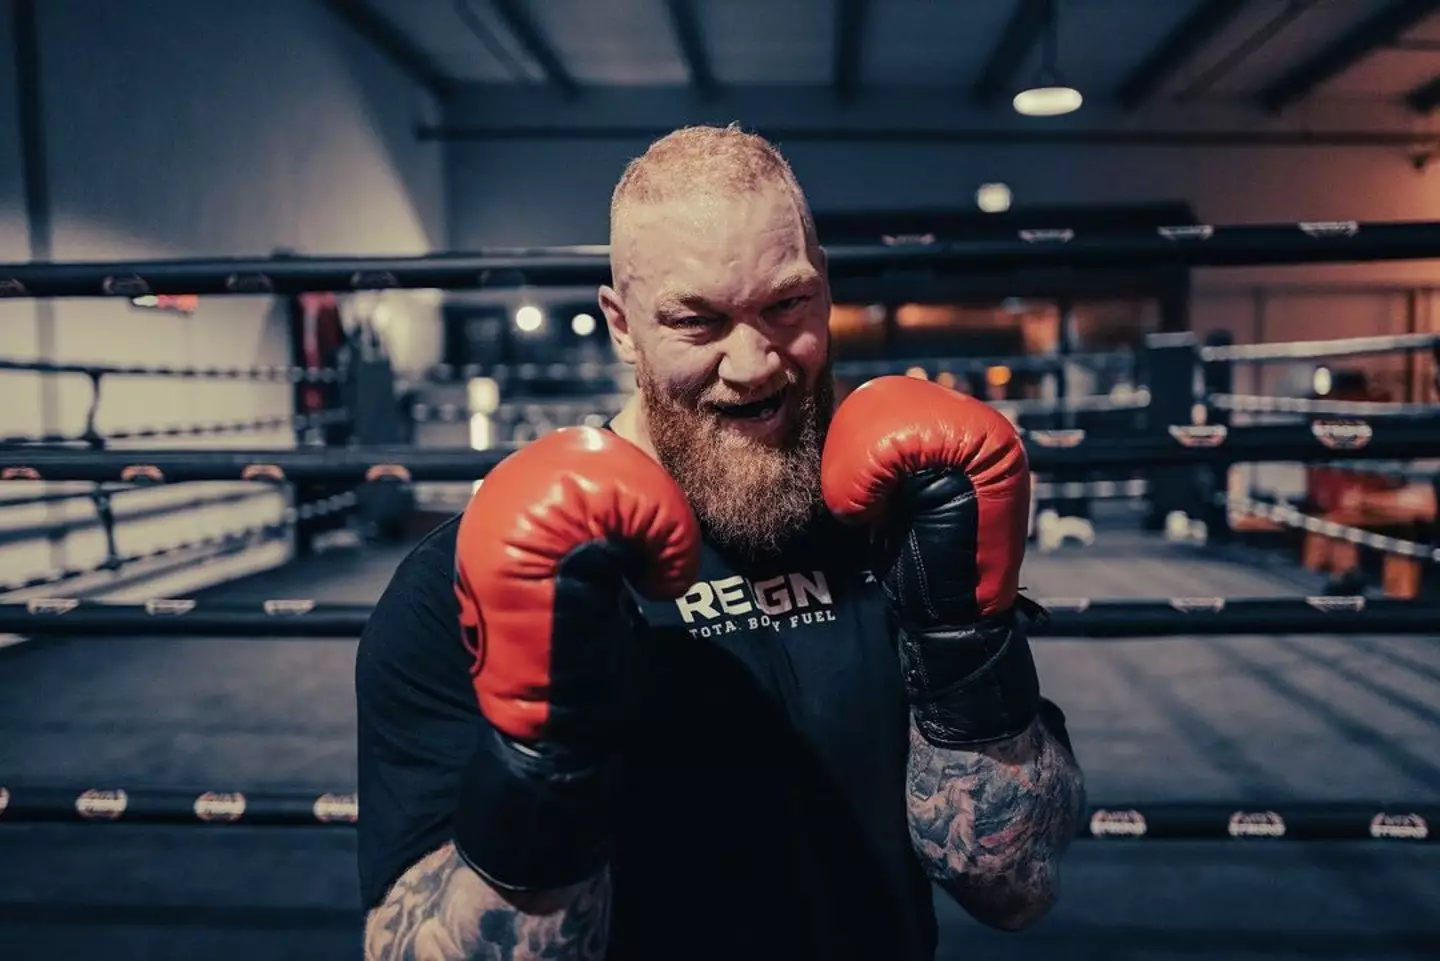 For now, The Mountain is fully focussed on Eddie Hall.